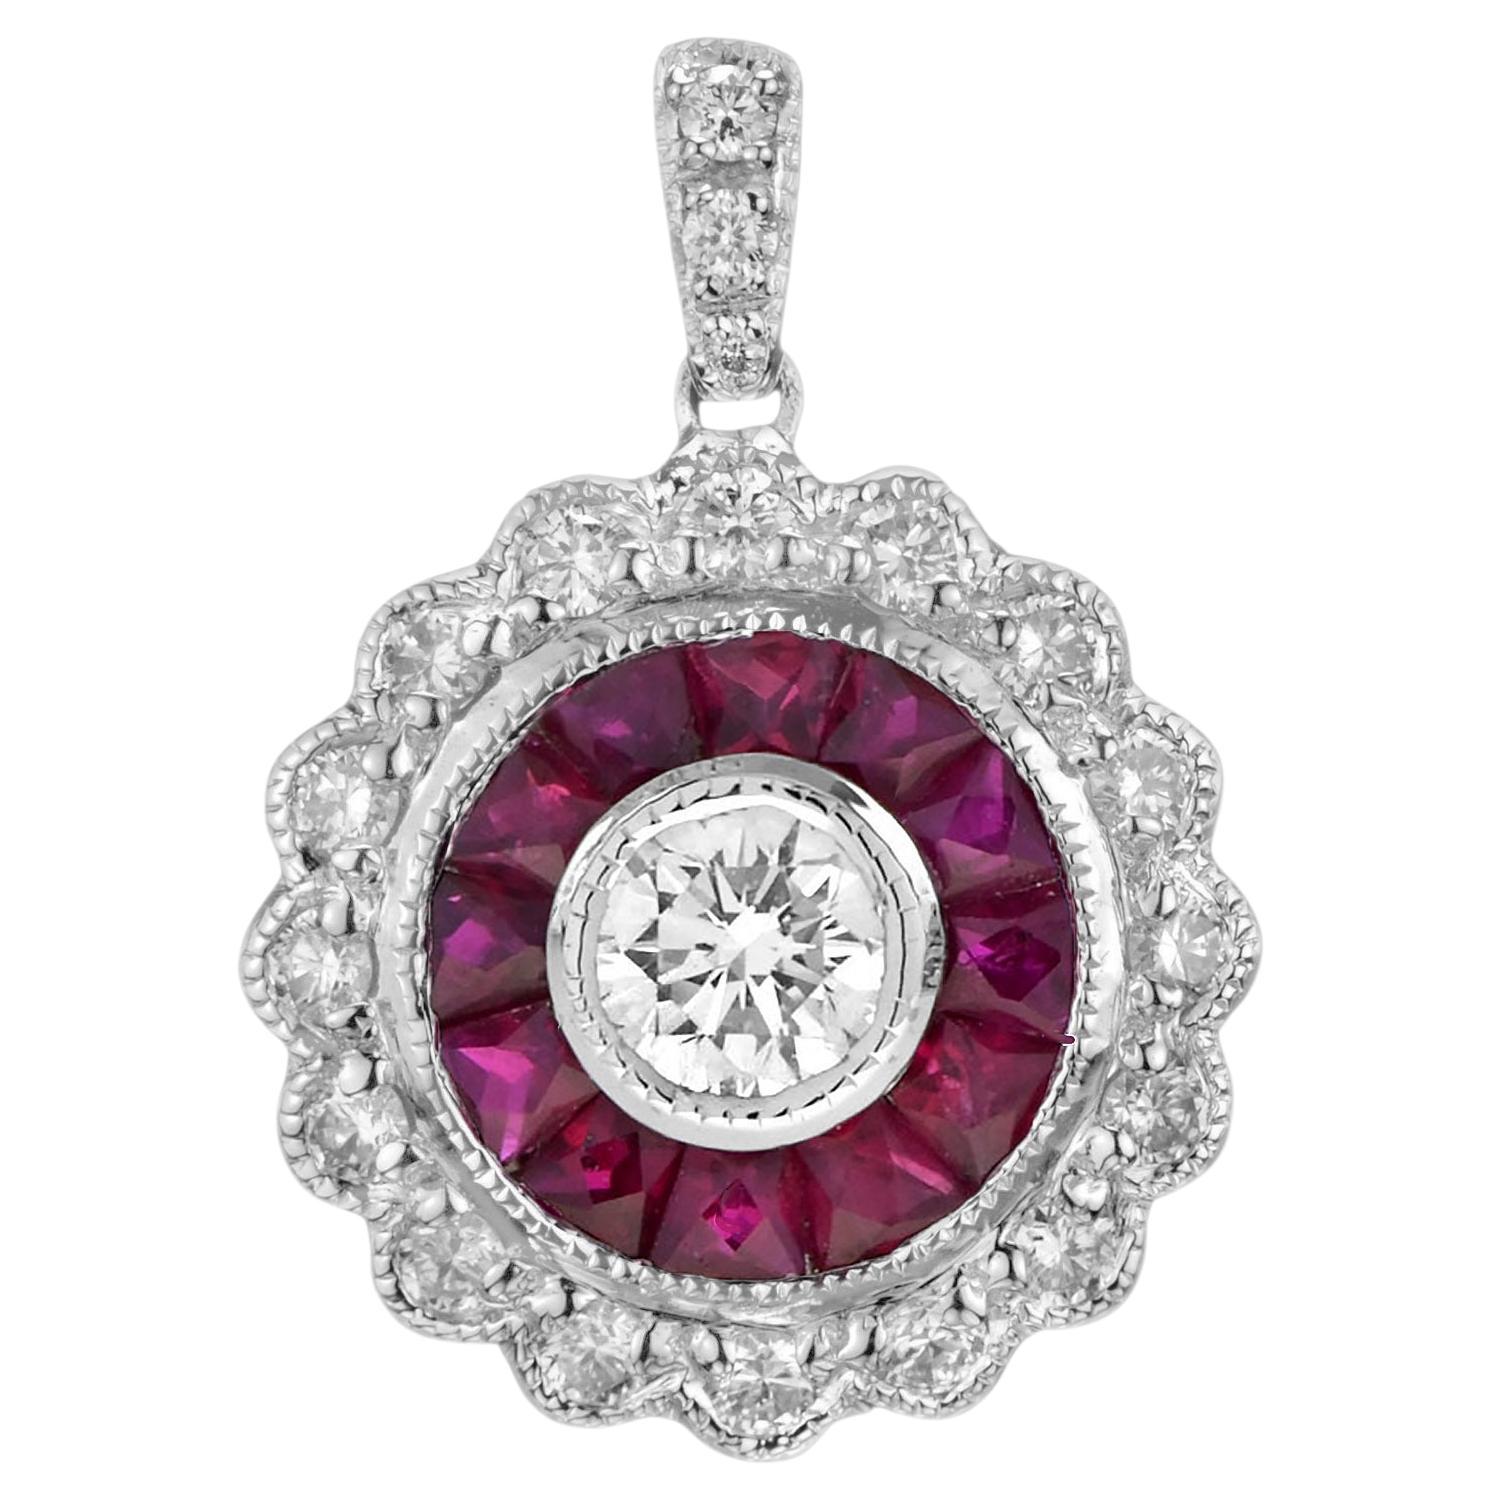 Diamond and Ruby Art Deco Style Target Pendant in 18K White Gold